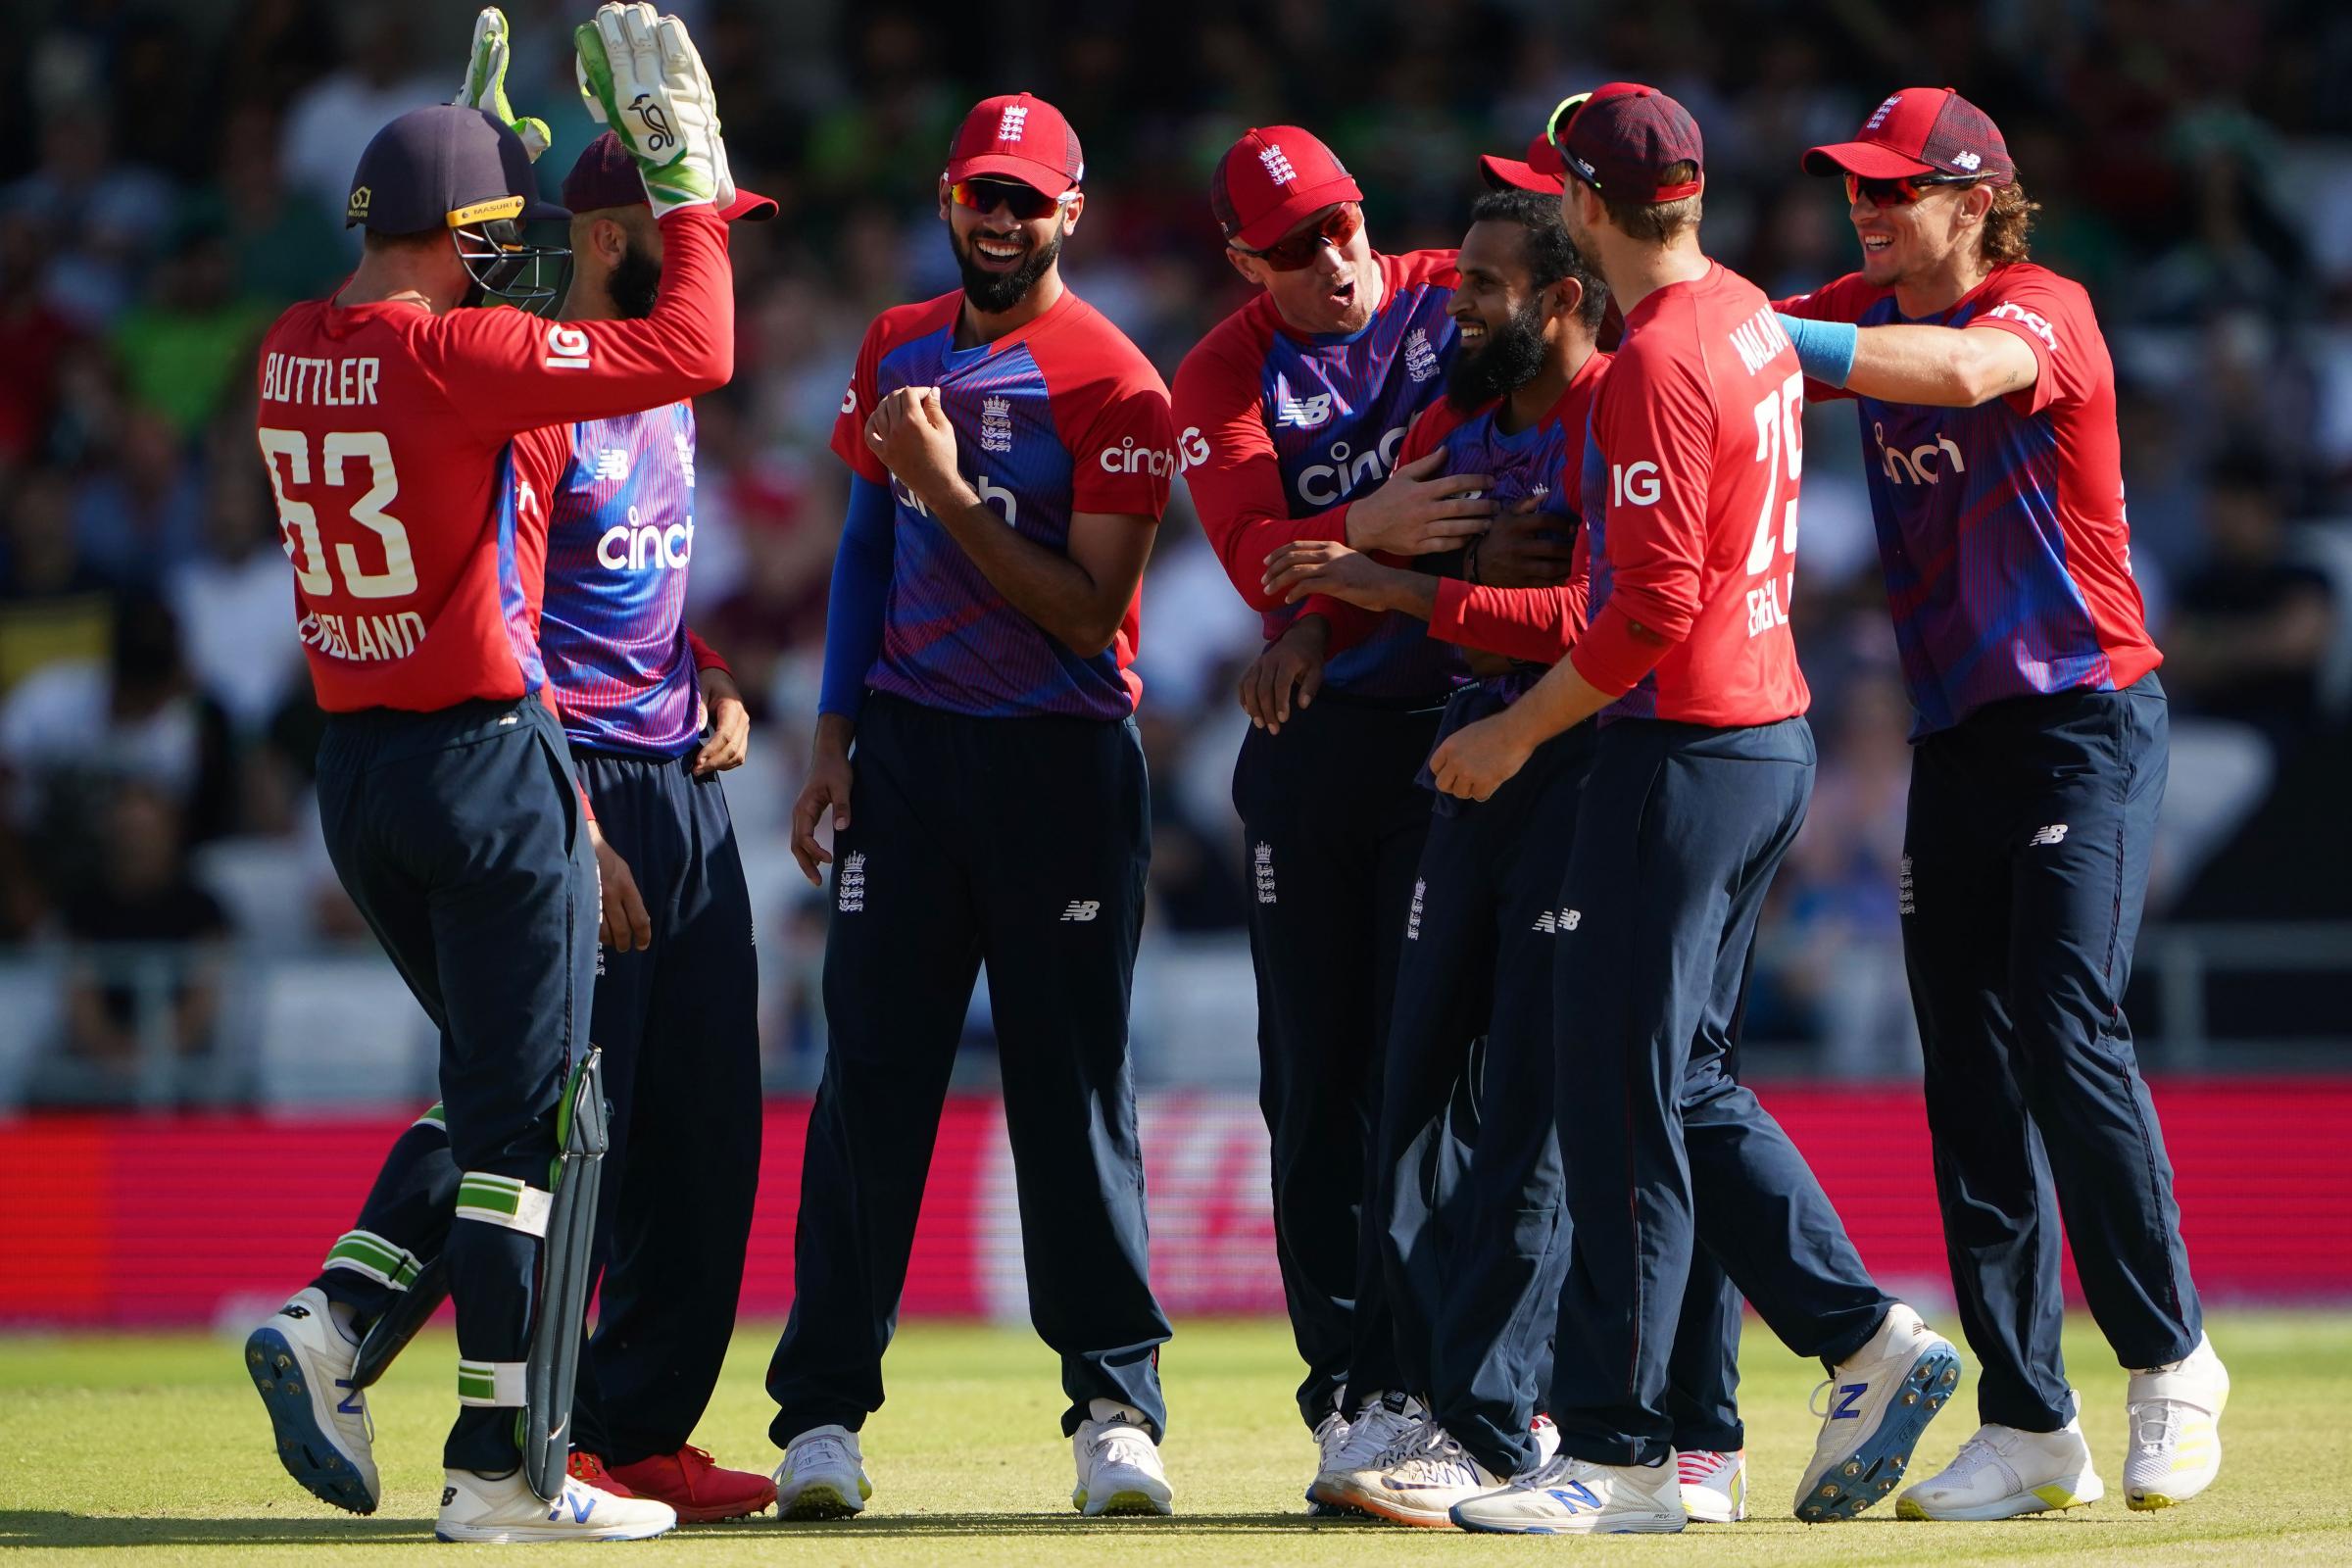 England Cricket Team in T20I | T20 World Cup | Sportzpoint.com